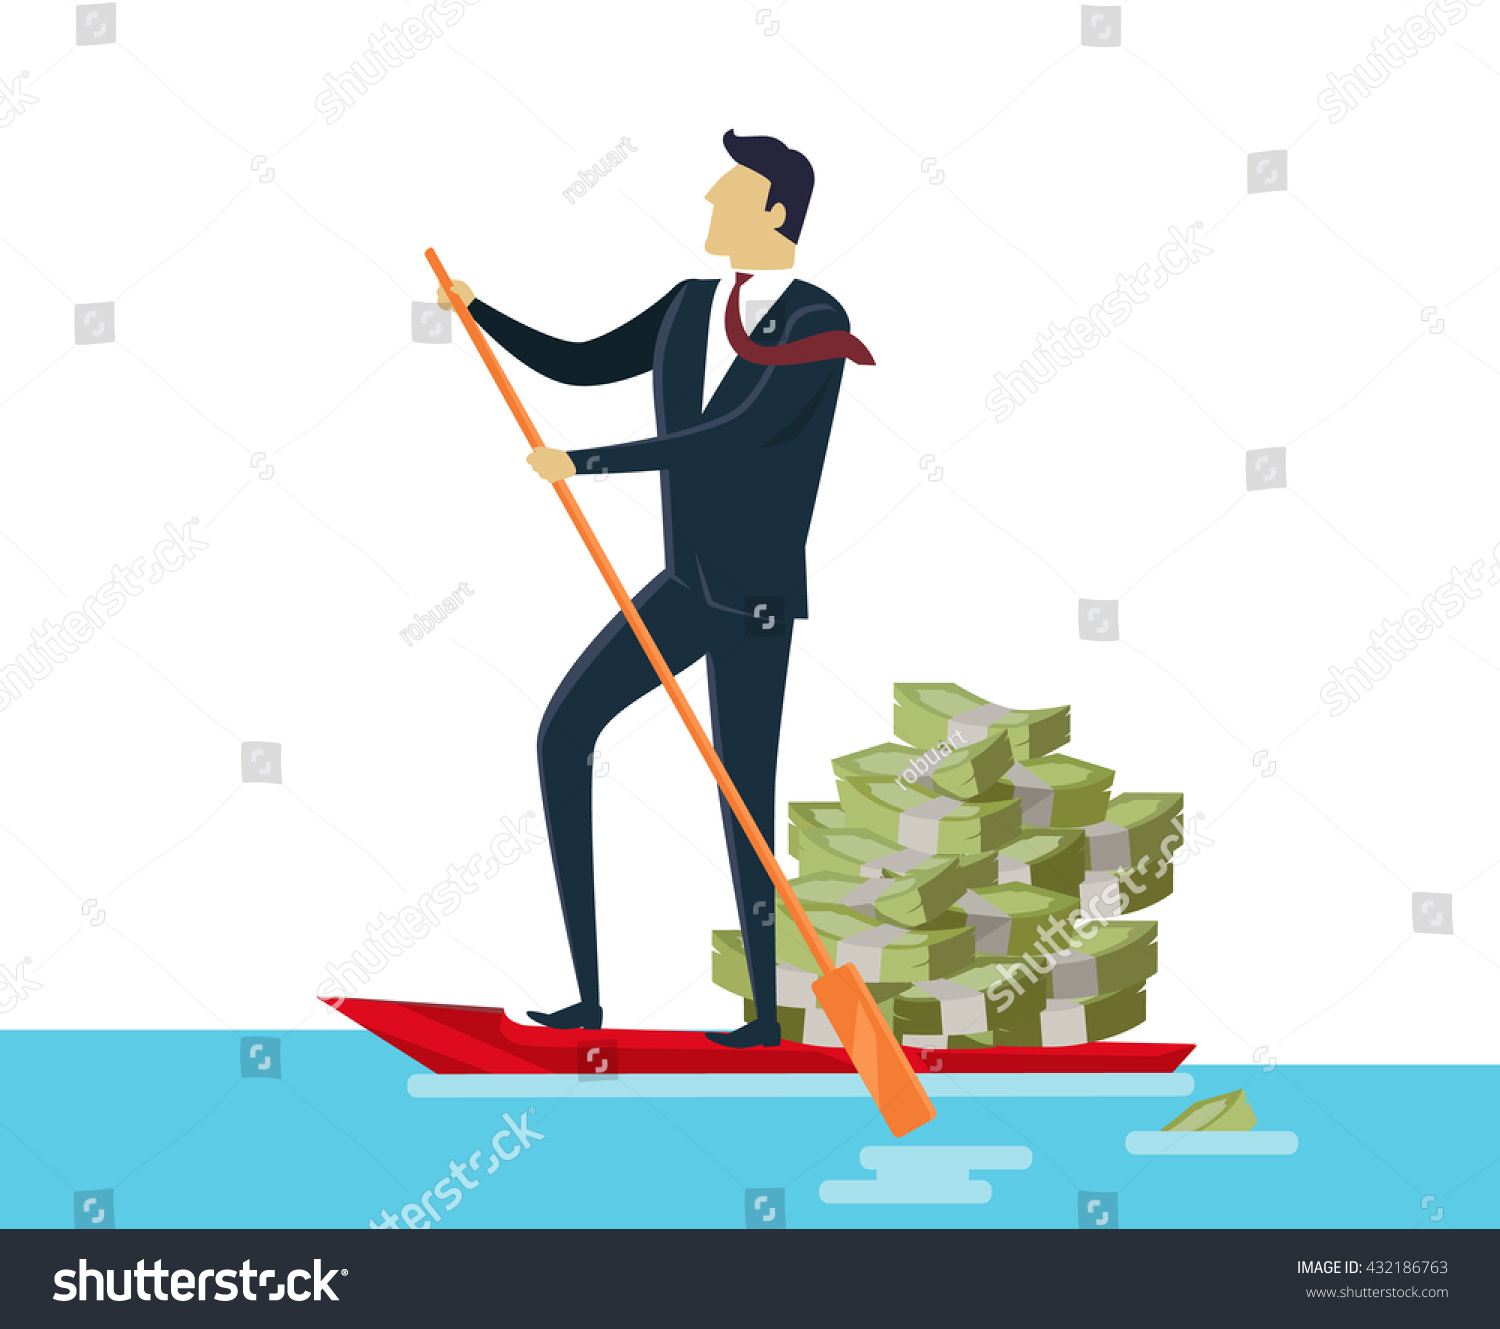 stock-vector-man-and-money-and-ride-in-boat-in-flat-style-man-rolls-cash-on-gondola-appointment-of-dollar-in-432186763.jpg